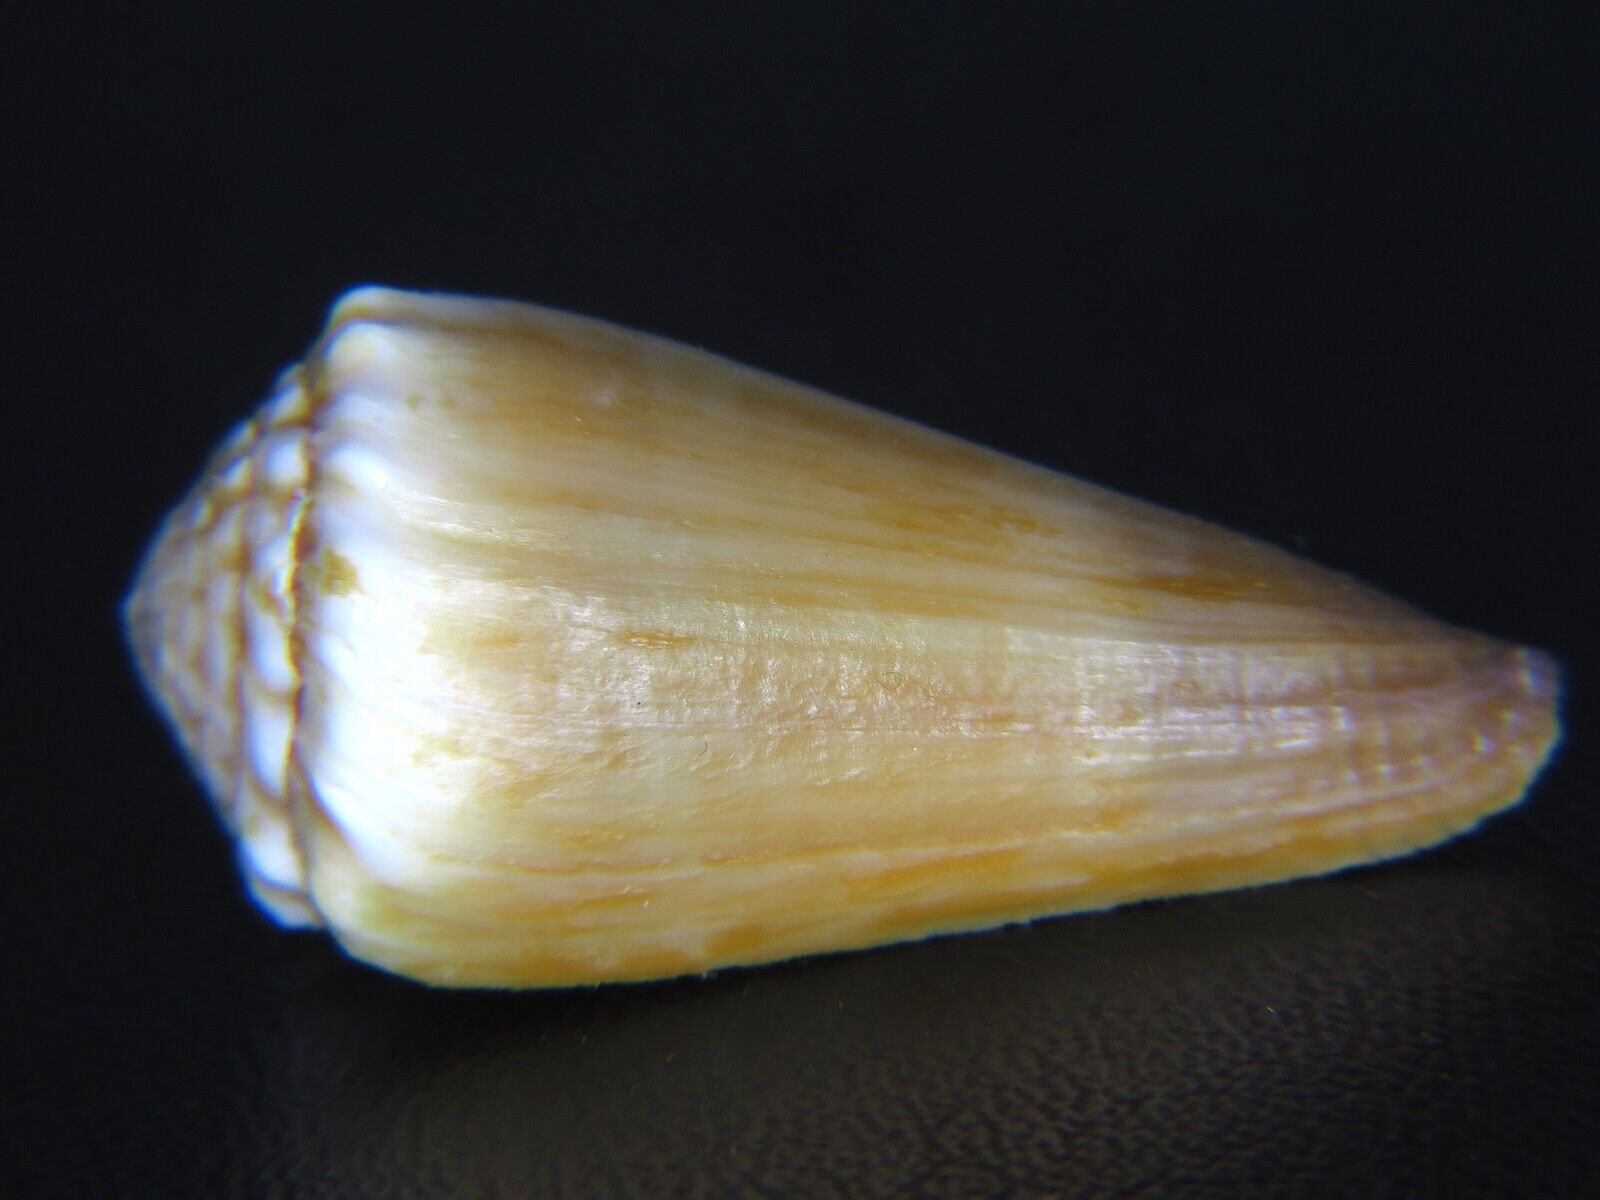 CONUS MORELETI: RARE HAW'N FORM @ 33.33MM RARELY OFFERED-ONE OF MY VERY BEST